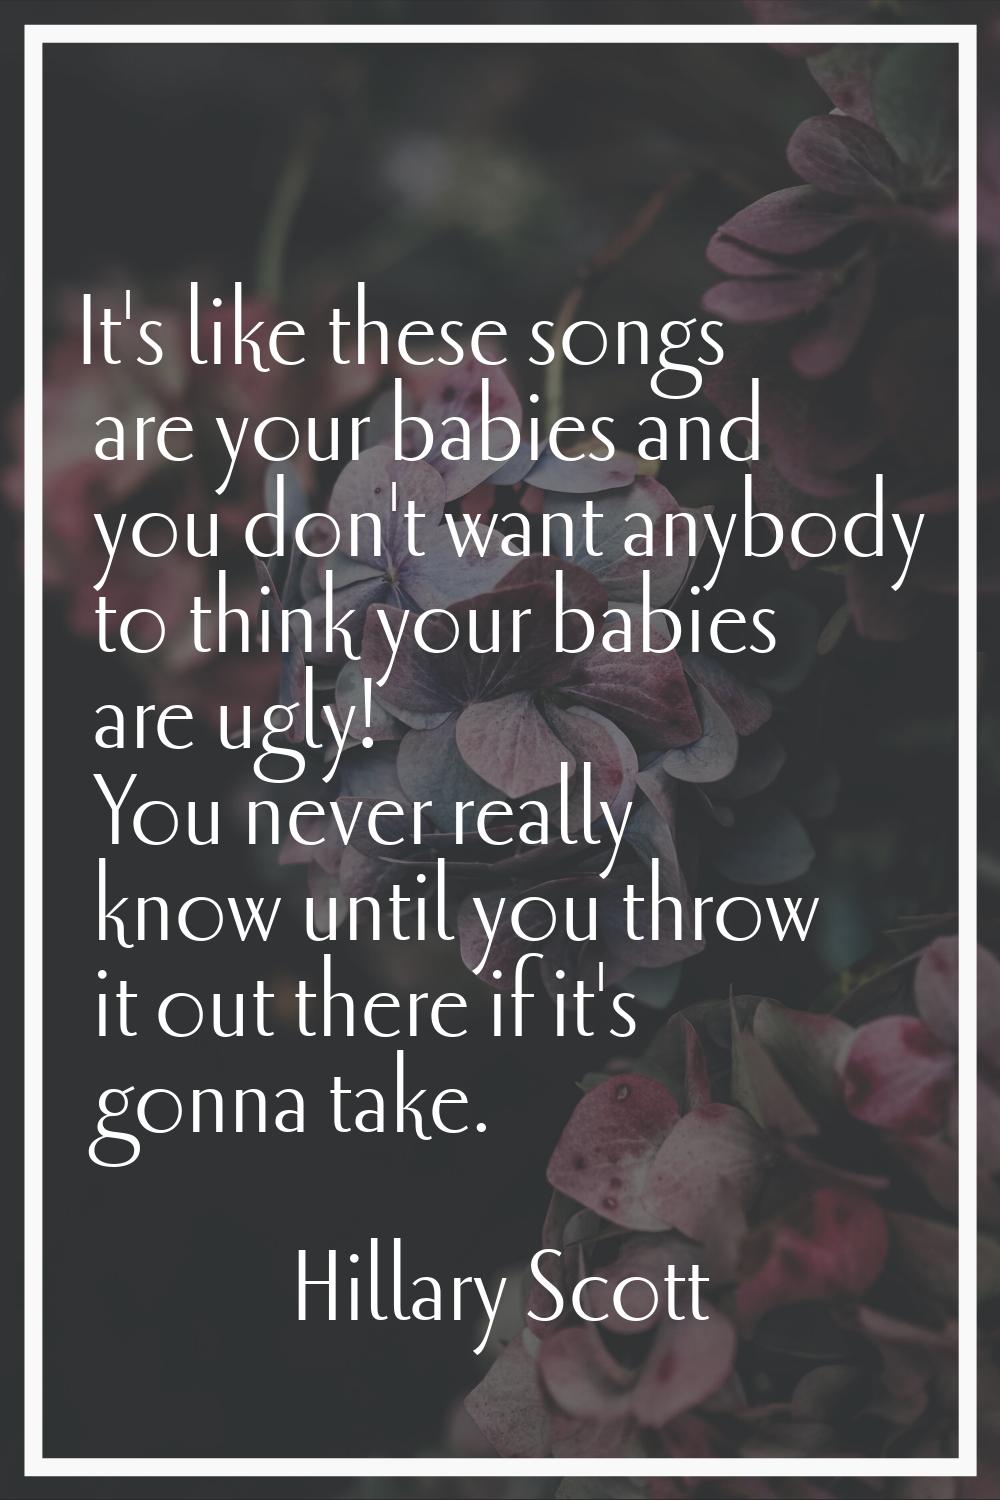 It's like these songs are your babies and you don't want anybody to think your babies are ugly! You